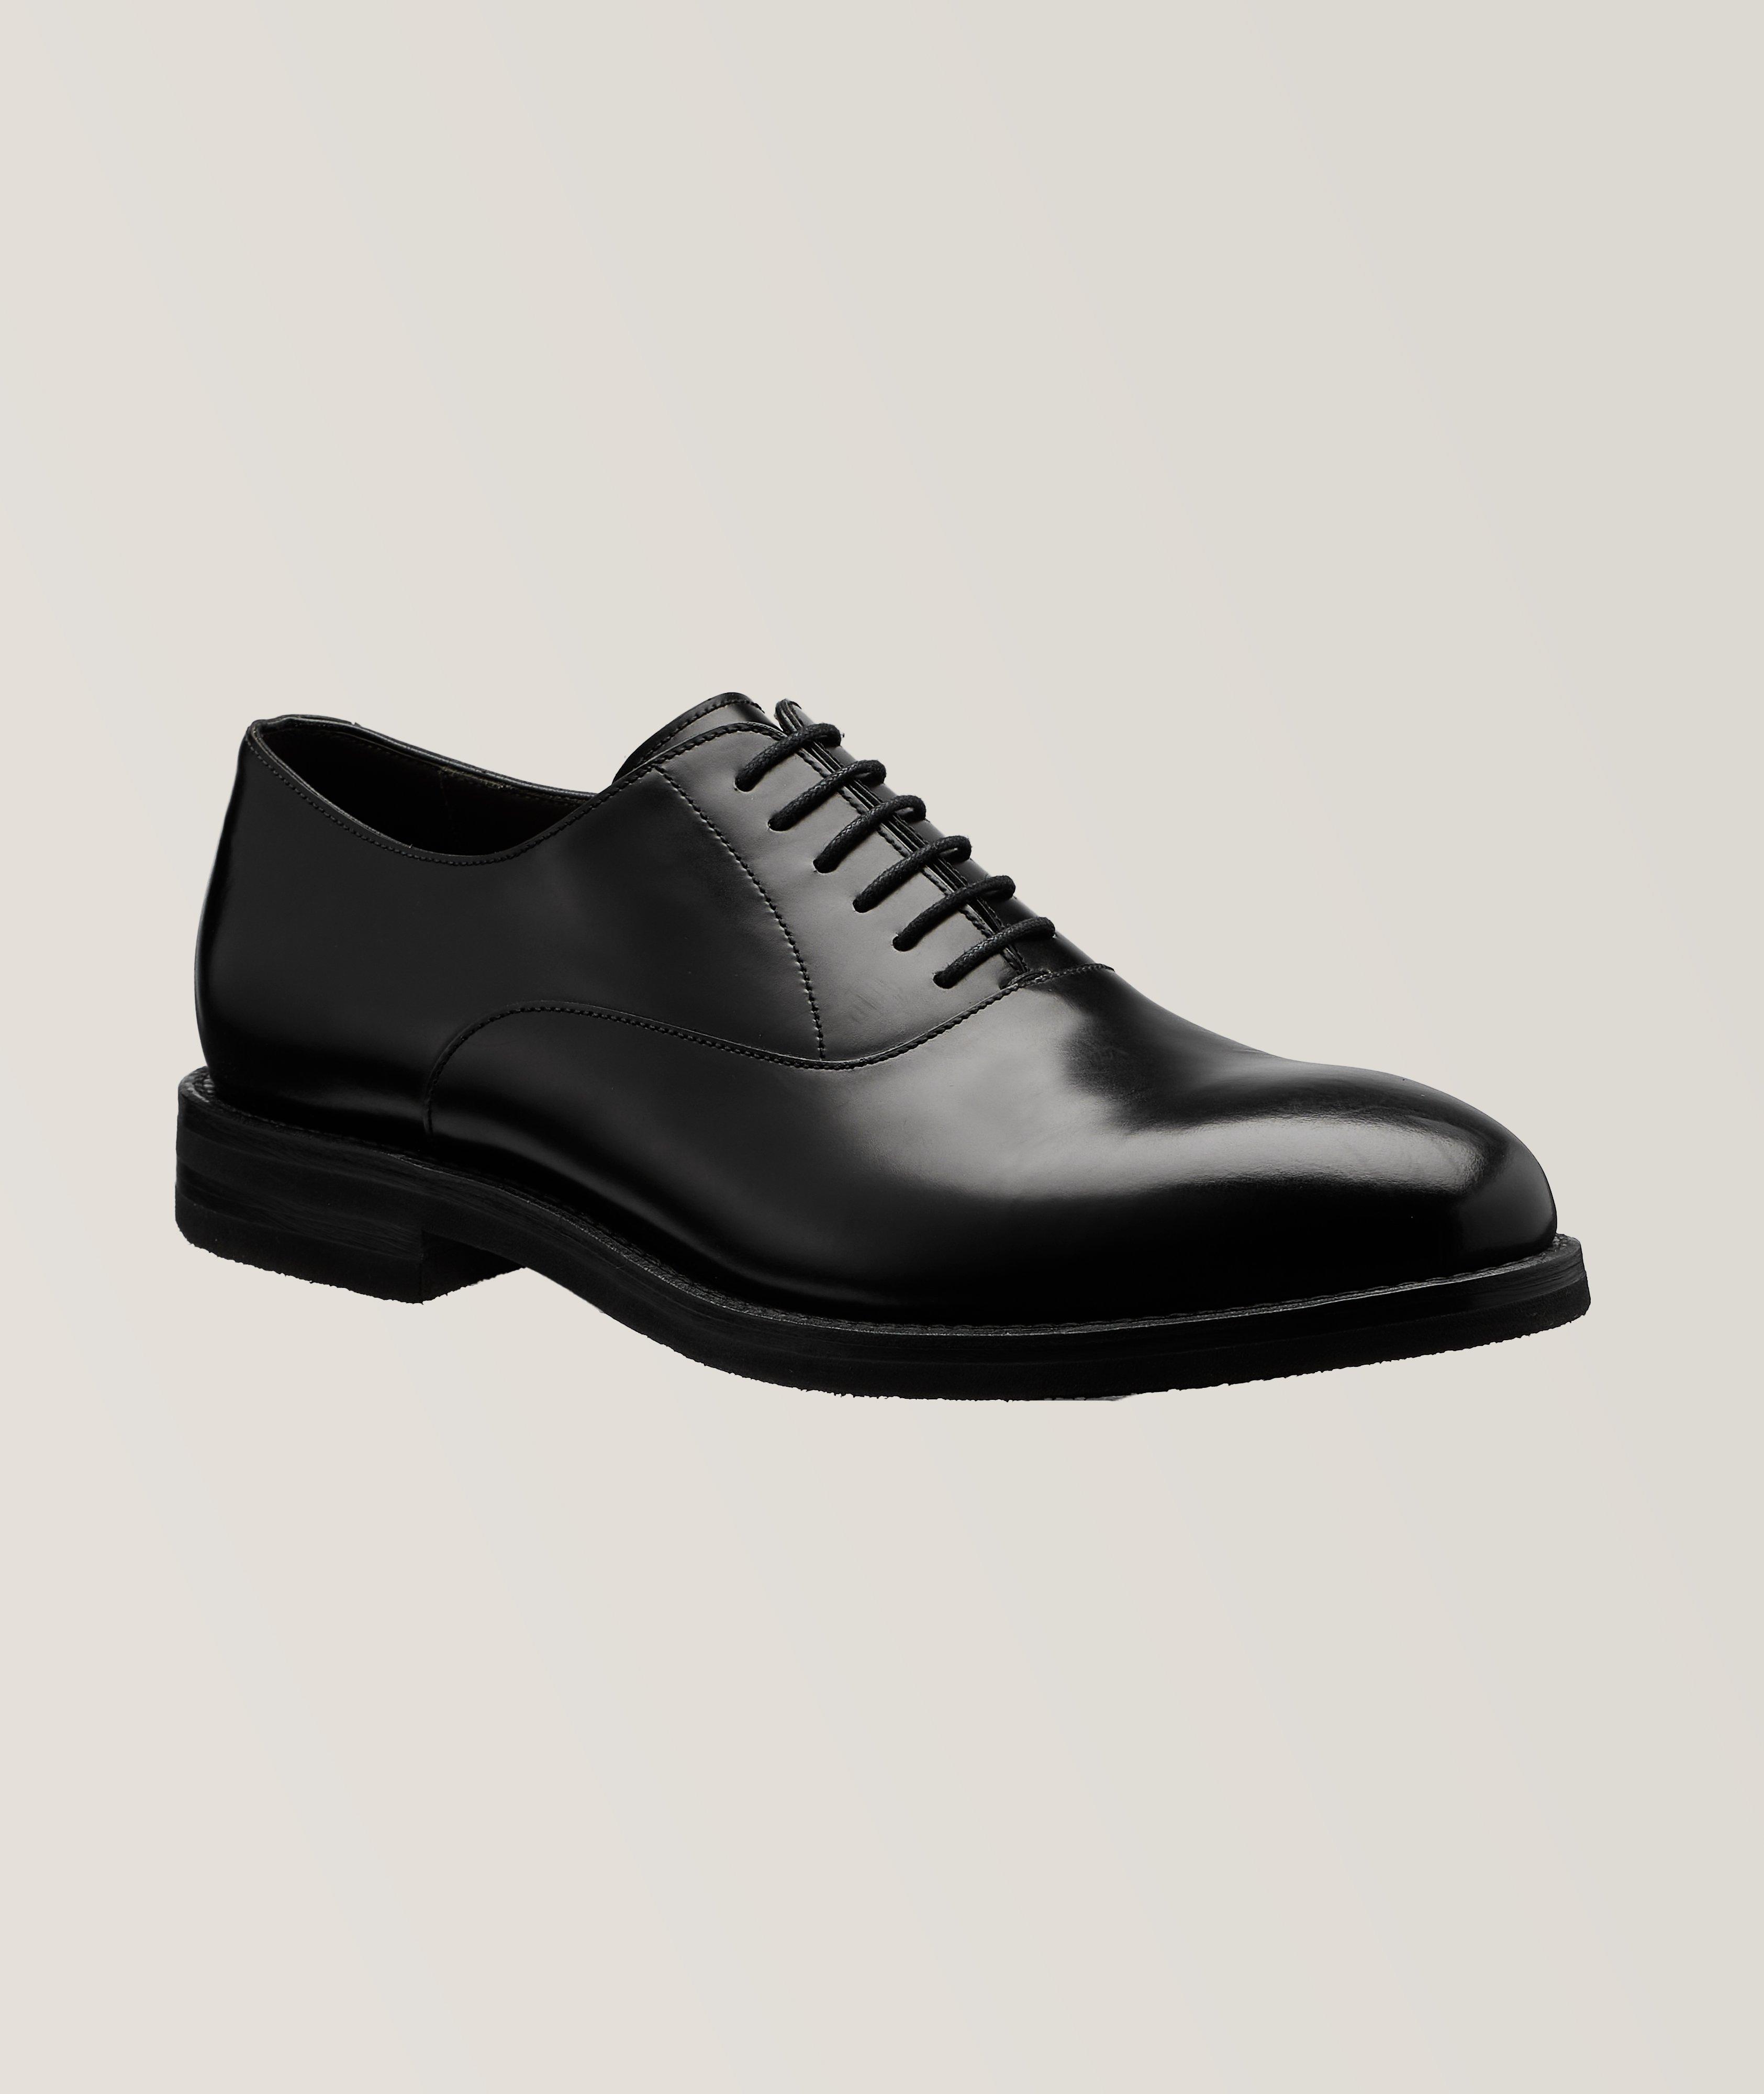 Lace-Up Leather Oxfords image 0